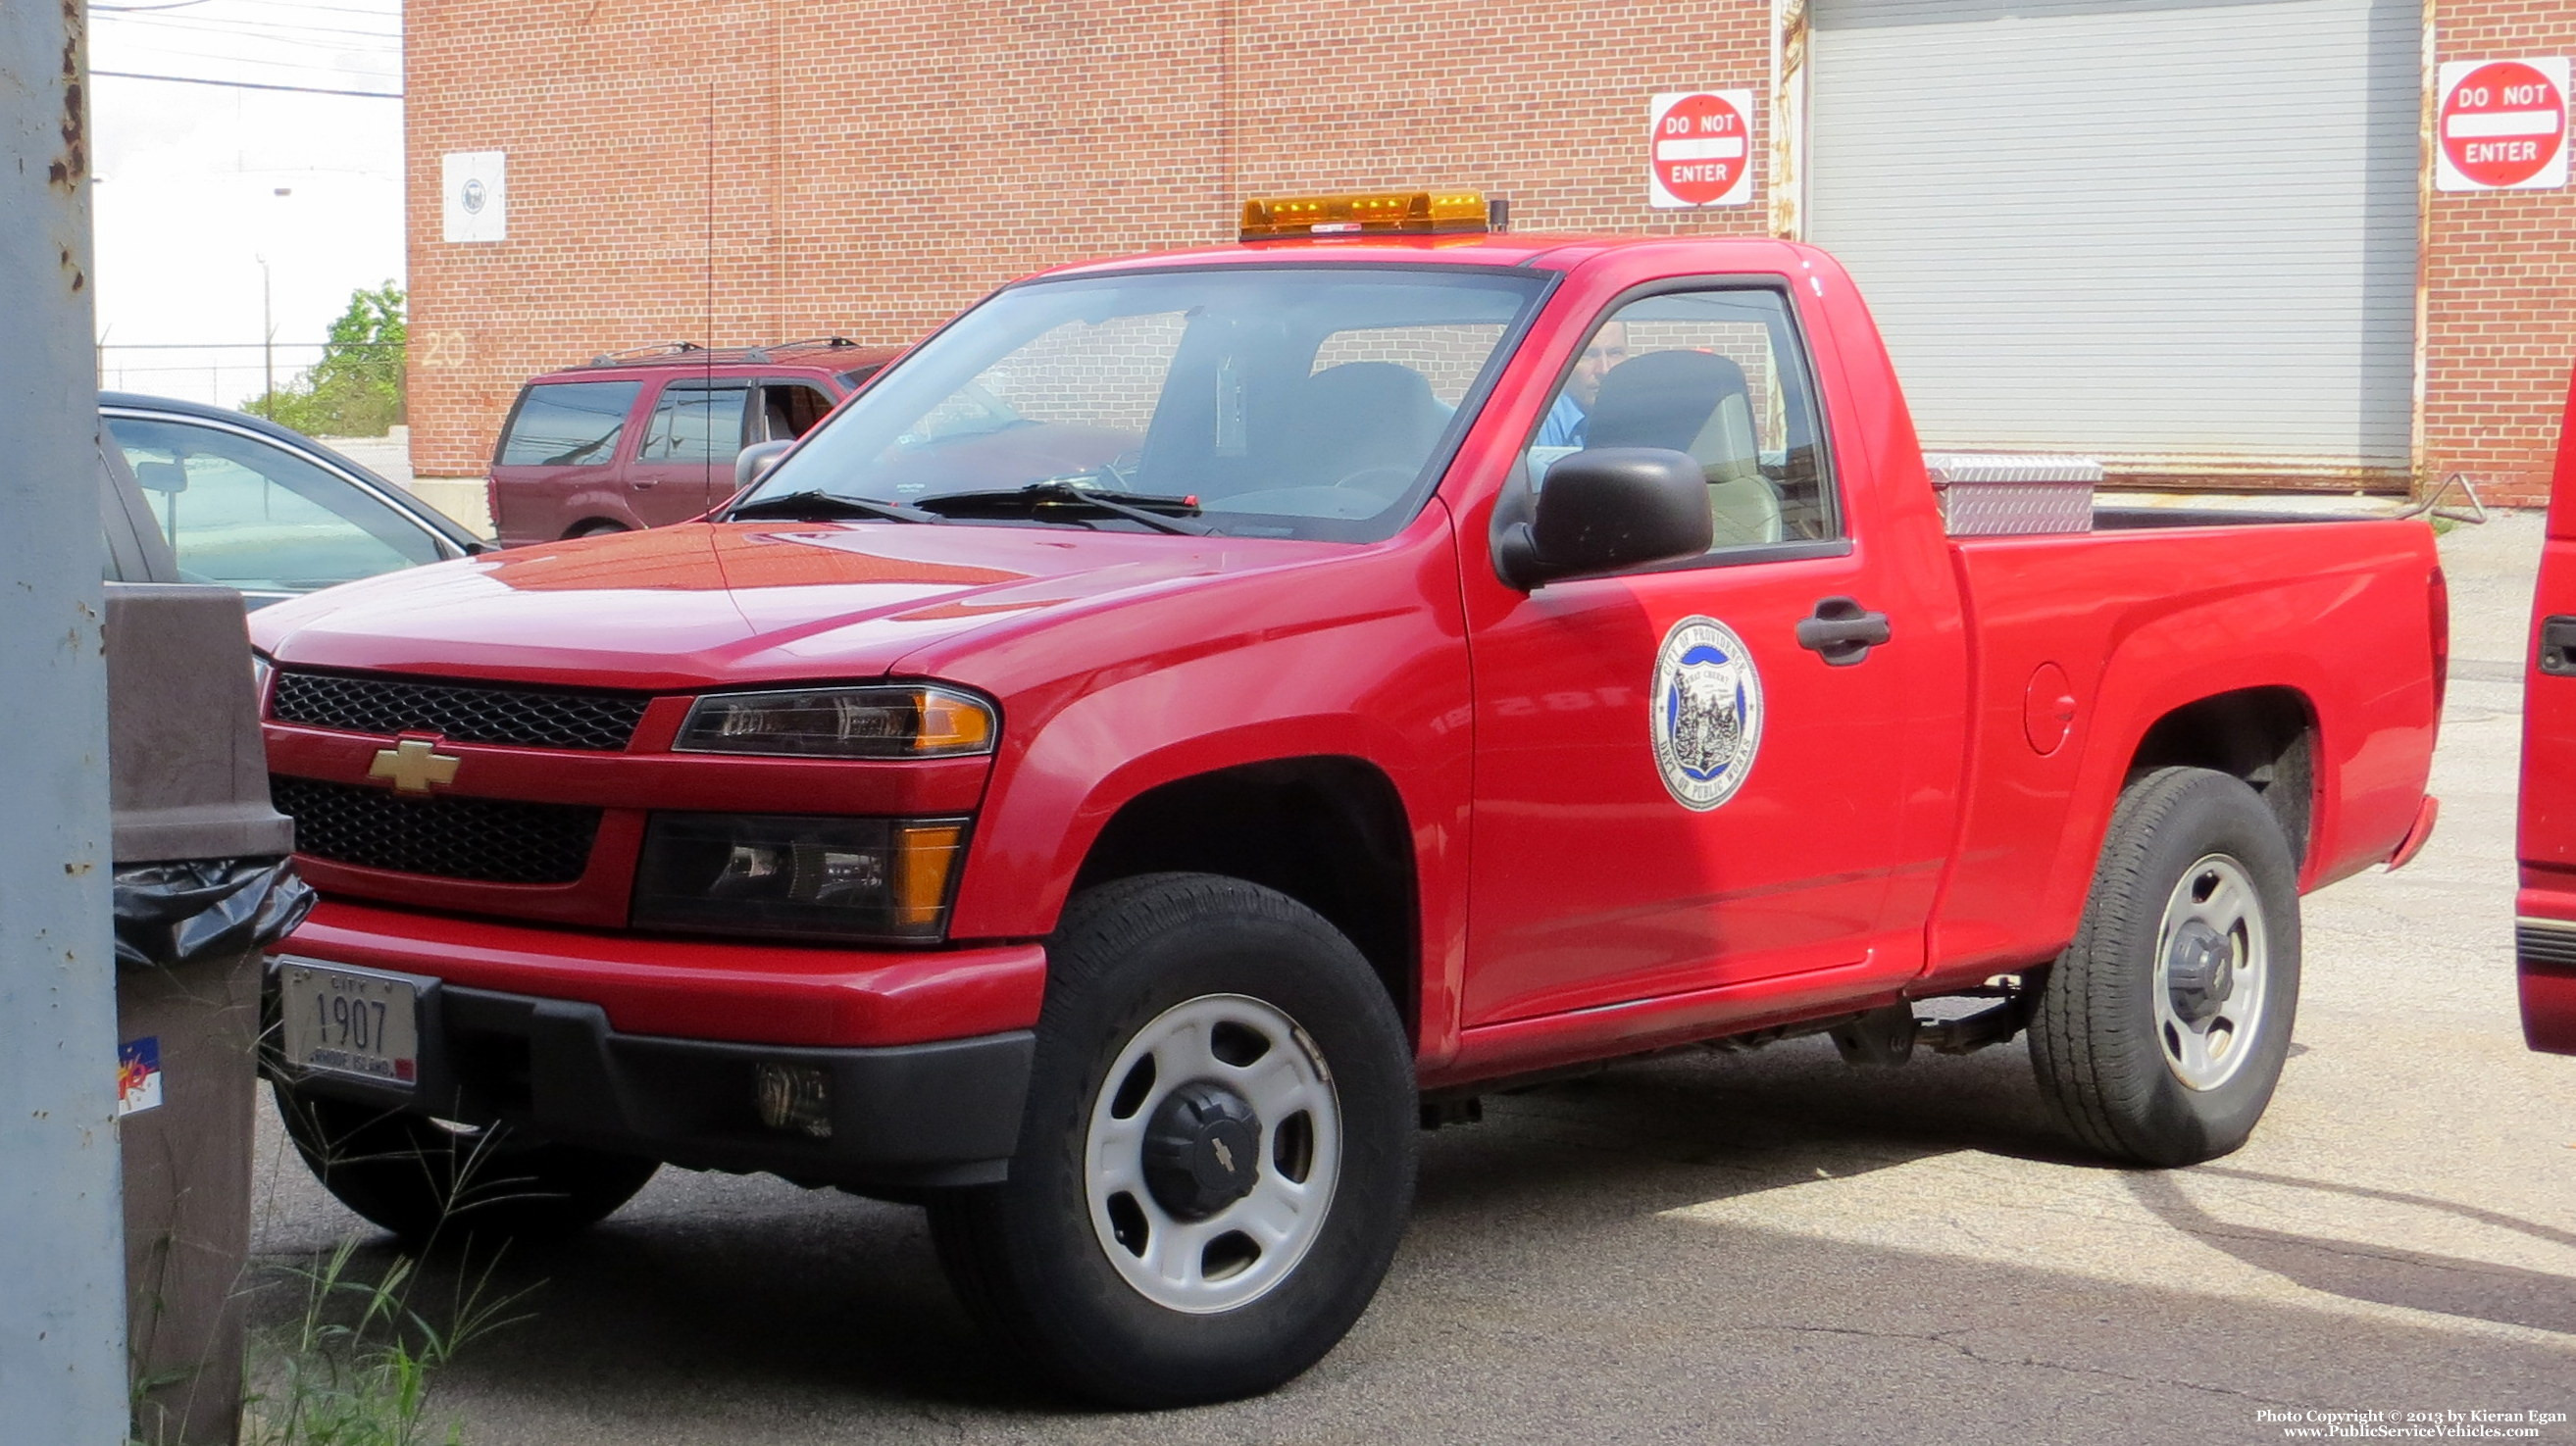 A photo  of Providence Sewer Division
            Truck 1907, a 2010-2012 Chevrolet Colorado             taken by Kieran Egan